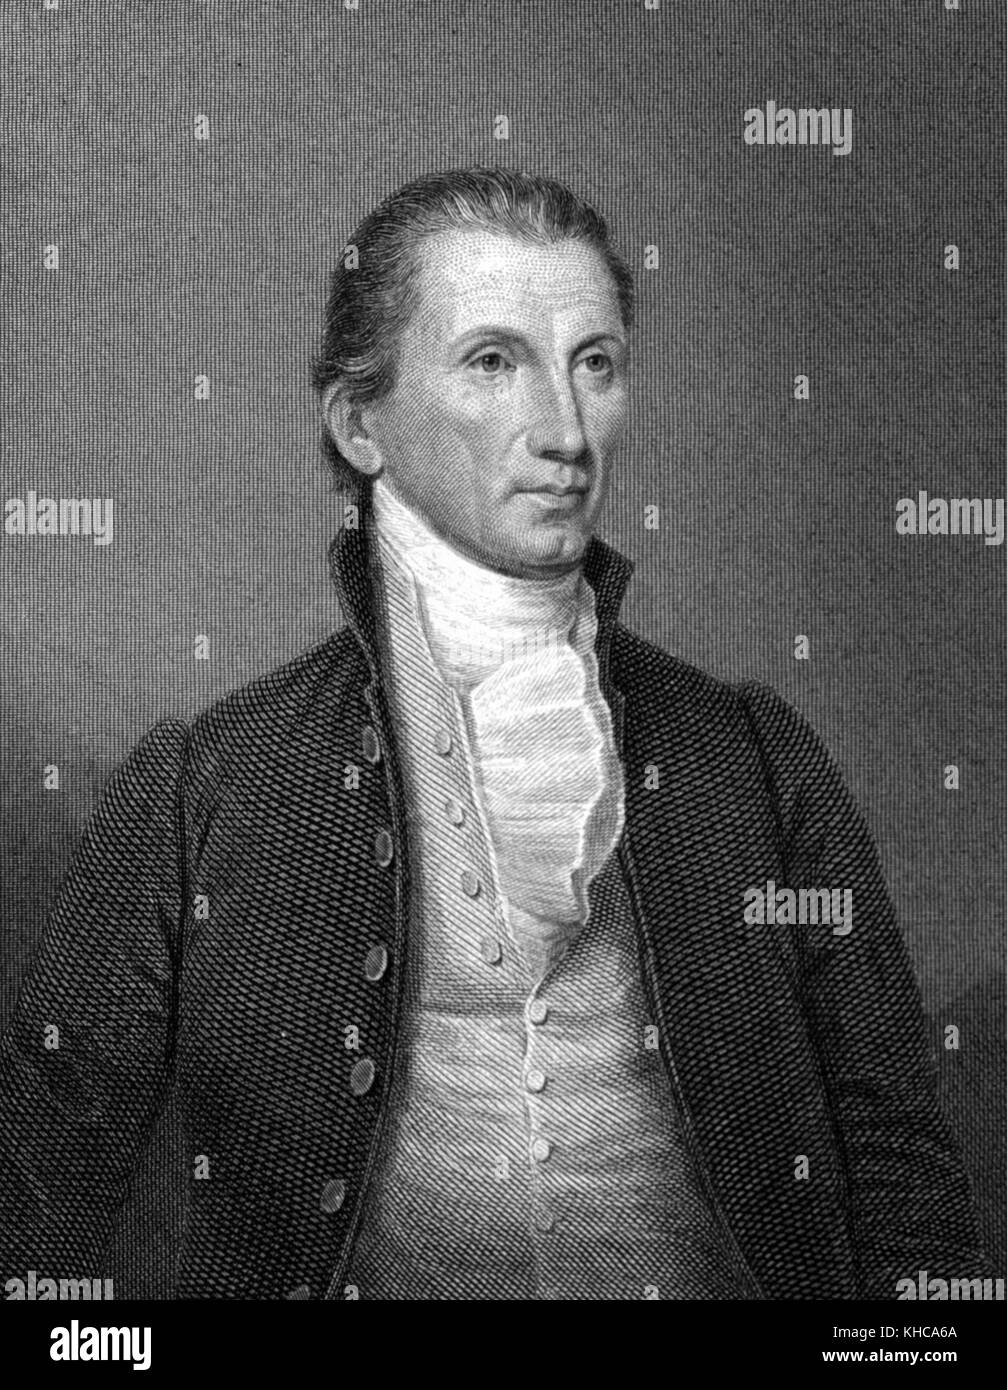 Engraving from a half length portrait of James Monroe, engraving by American artist Asher Brown Durand, 1826. From the New York Public Library. Stock Photo